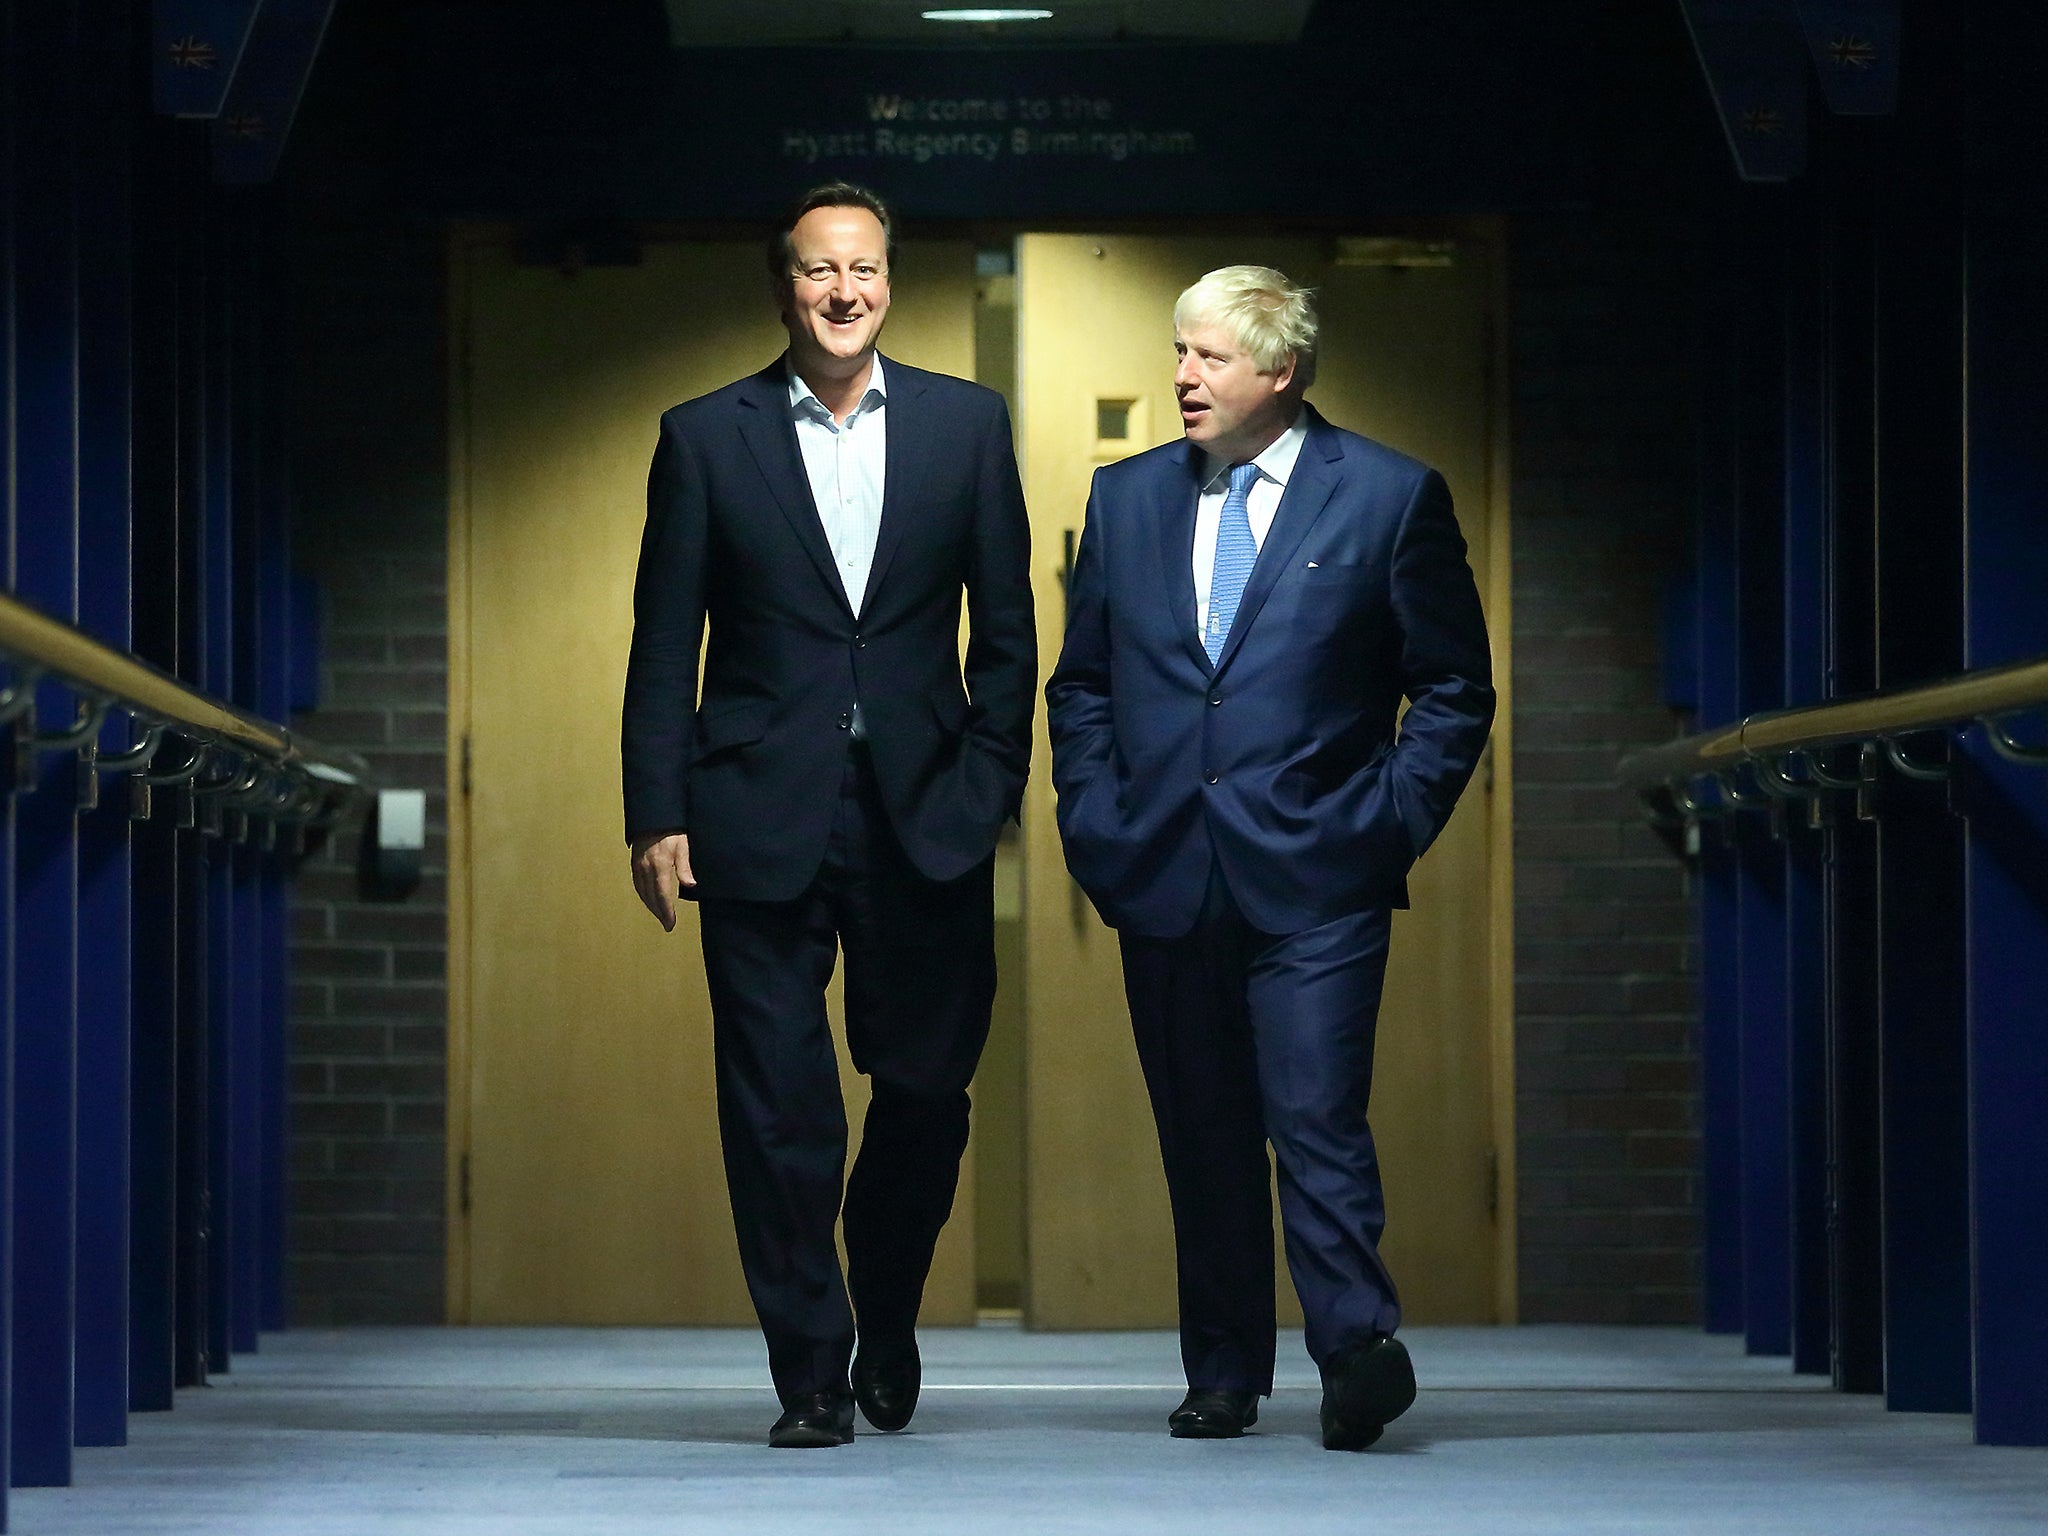 The Prime Minister's relationship with Boris Johnson will play a critical role in the aftermath of the vote